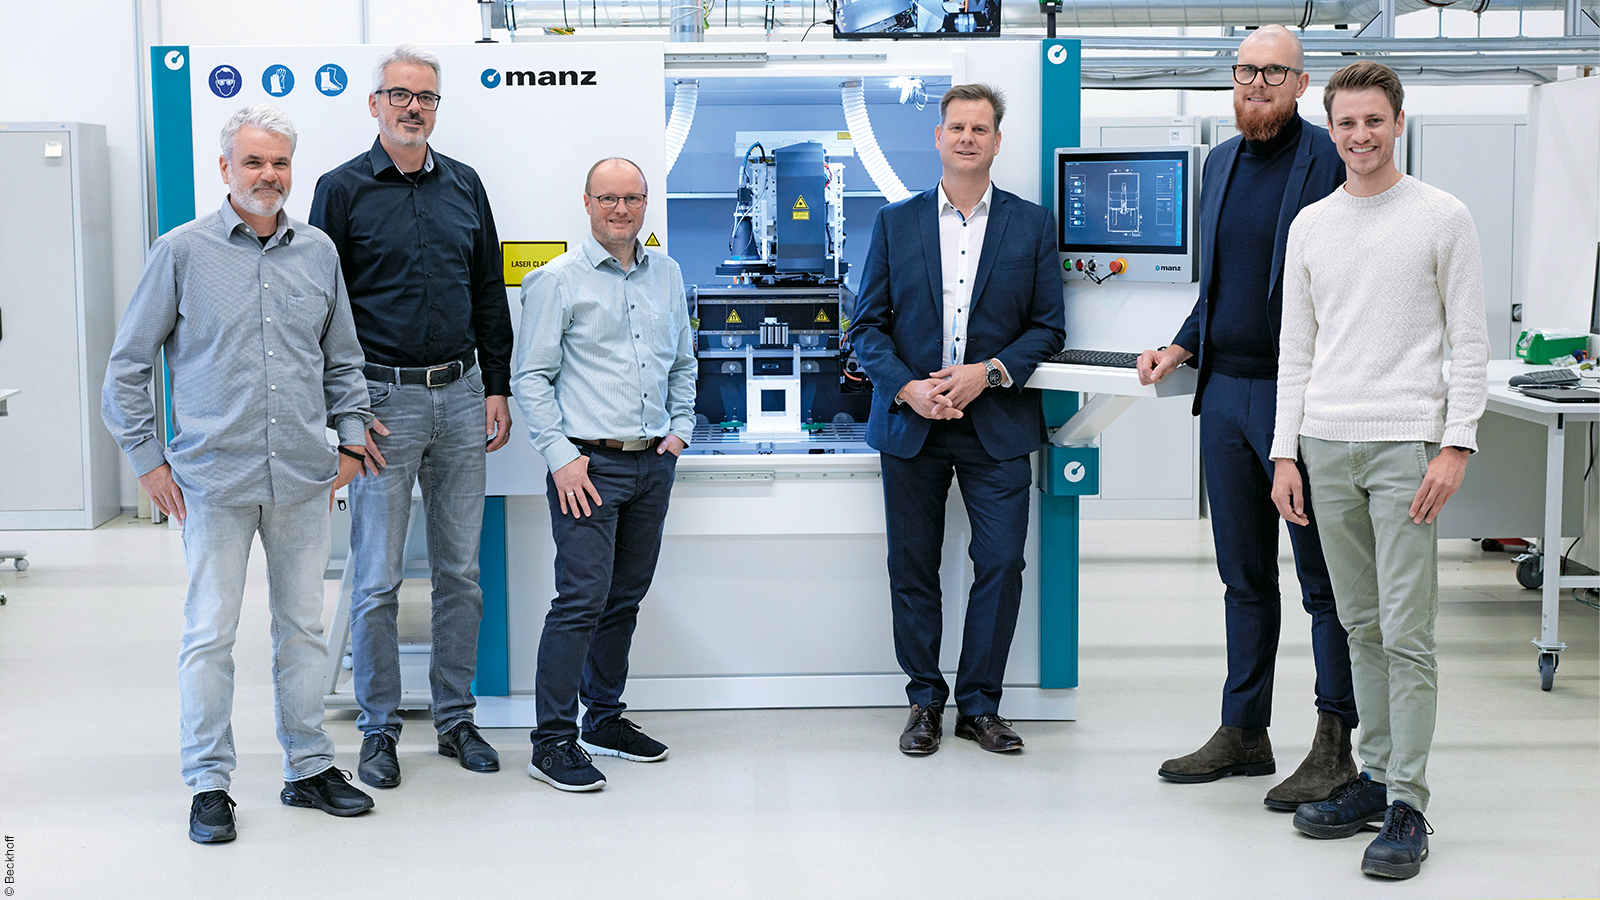 The project participants in front of the BLS 500 (from left to right): Oliver Heilig, sales and system consulting at Beckhoff, Axel Bartmann, Director Marketing and Corporate Communications at Manz, Stephan Lausterer, Head of Software Core Design and Product Development at Manz, Jörg Rottkord and Tilman Plaß, both automotive industry managers at Beckhoff, and Felix Röckel, process developer at Manz 